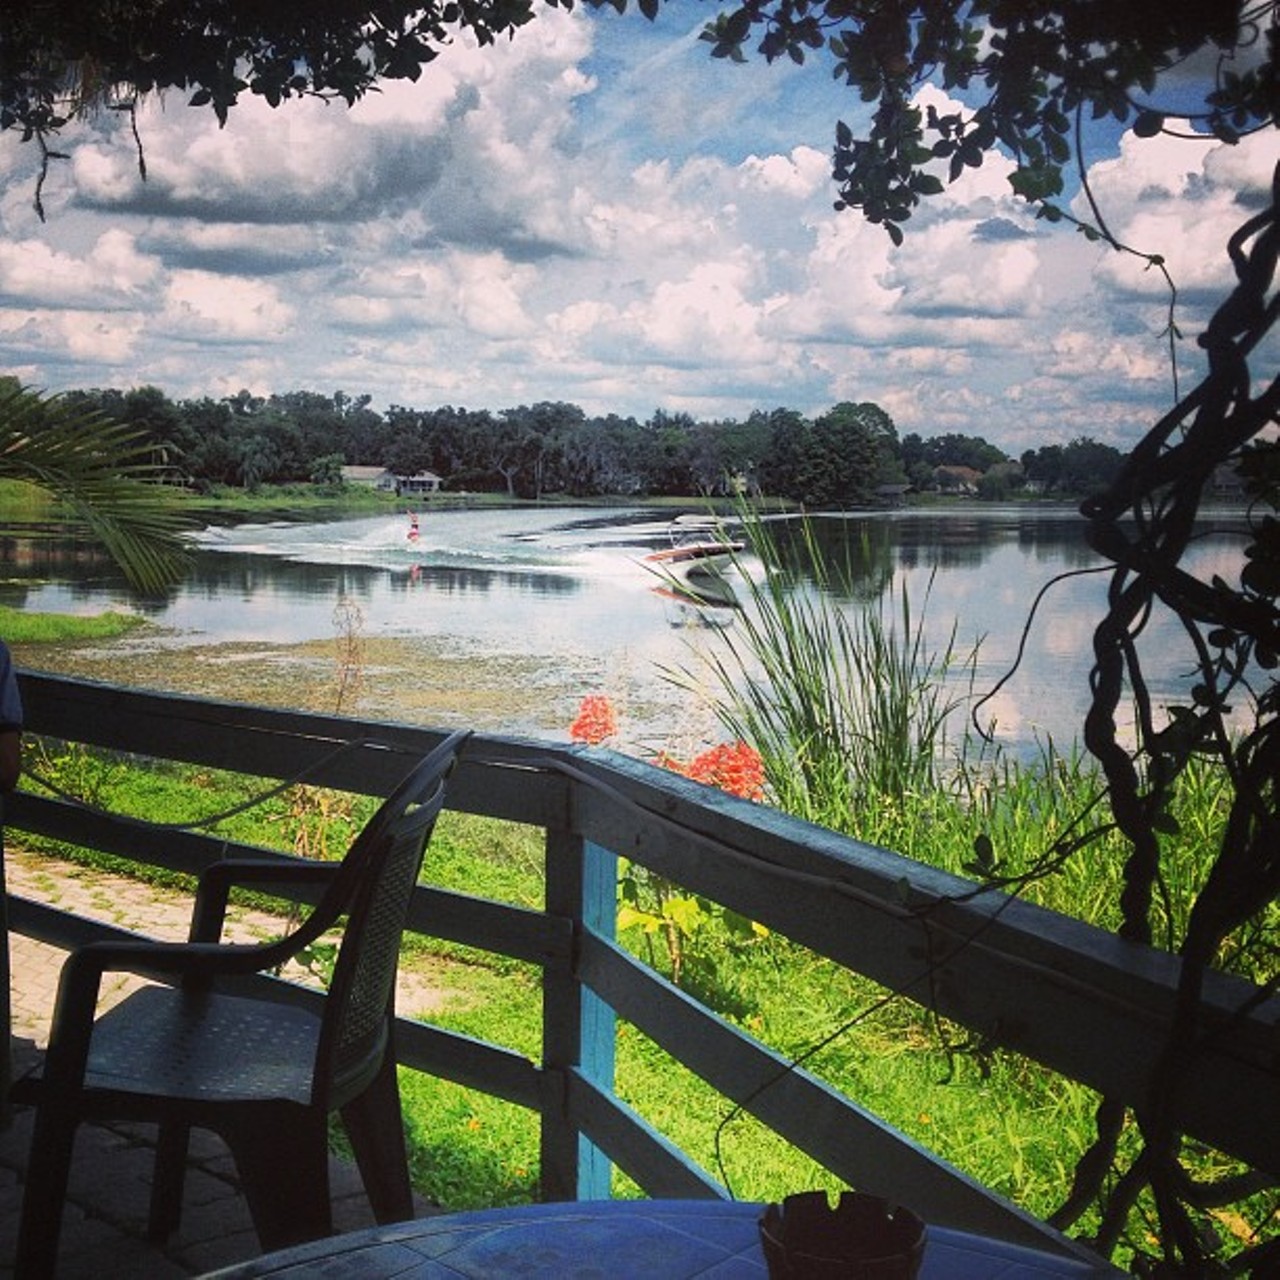 Julie's Waterfront
4201 S Orange Ave, Orlando
407-240-2557
Julie's Waterfront's patio is all about classic Florida charm, and the waterfront view can't be beat.Photo via poundsignlb on Instagram.